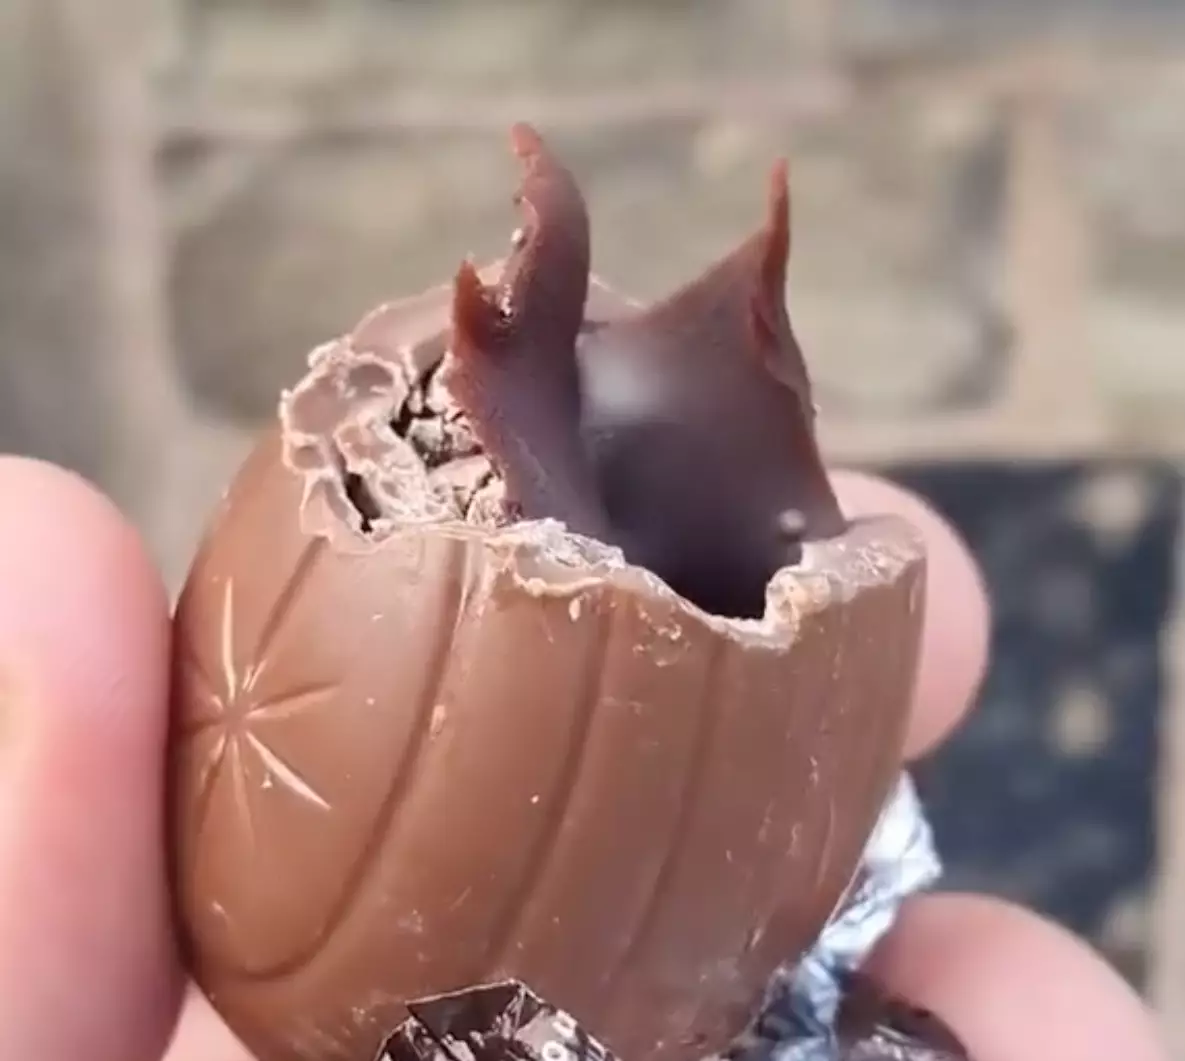 This Creme Egg is filled with chocolate fondant (